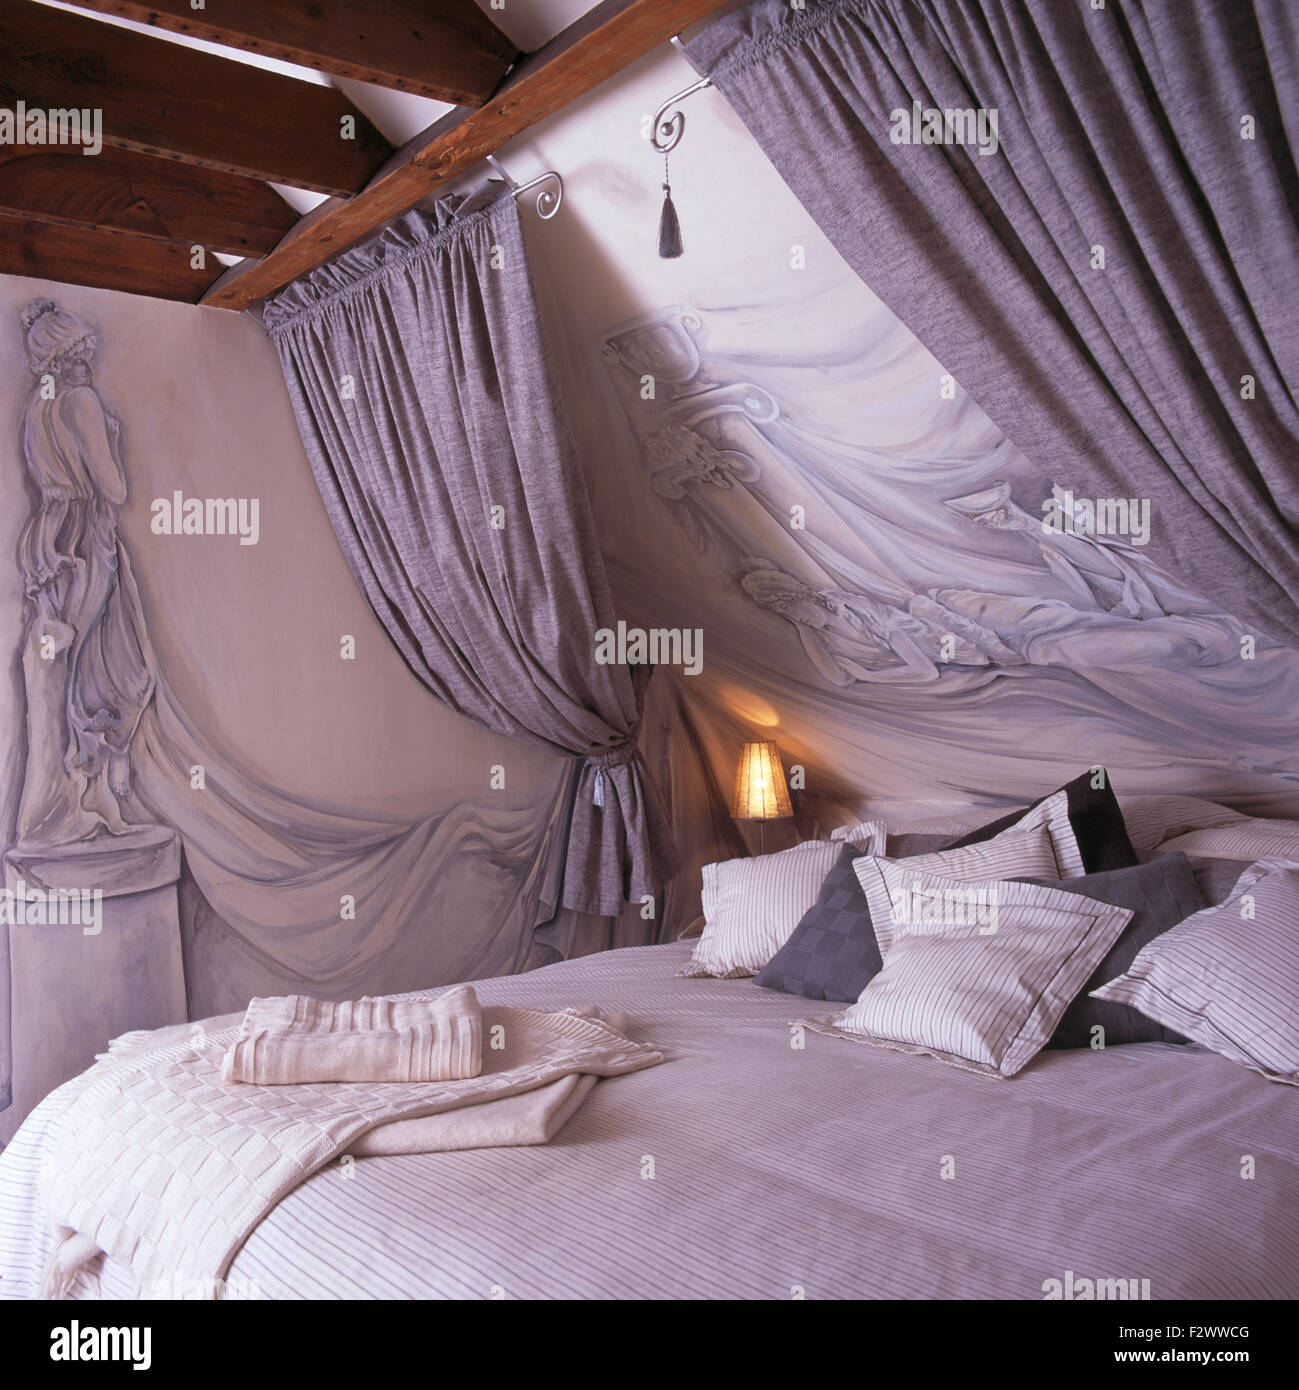 Trompe-l'oeil classical statues on wall and sloping ceiling in nineties attic bedroom with grey drapes above bed Stock Photo